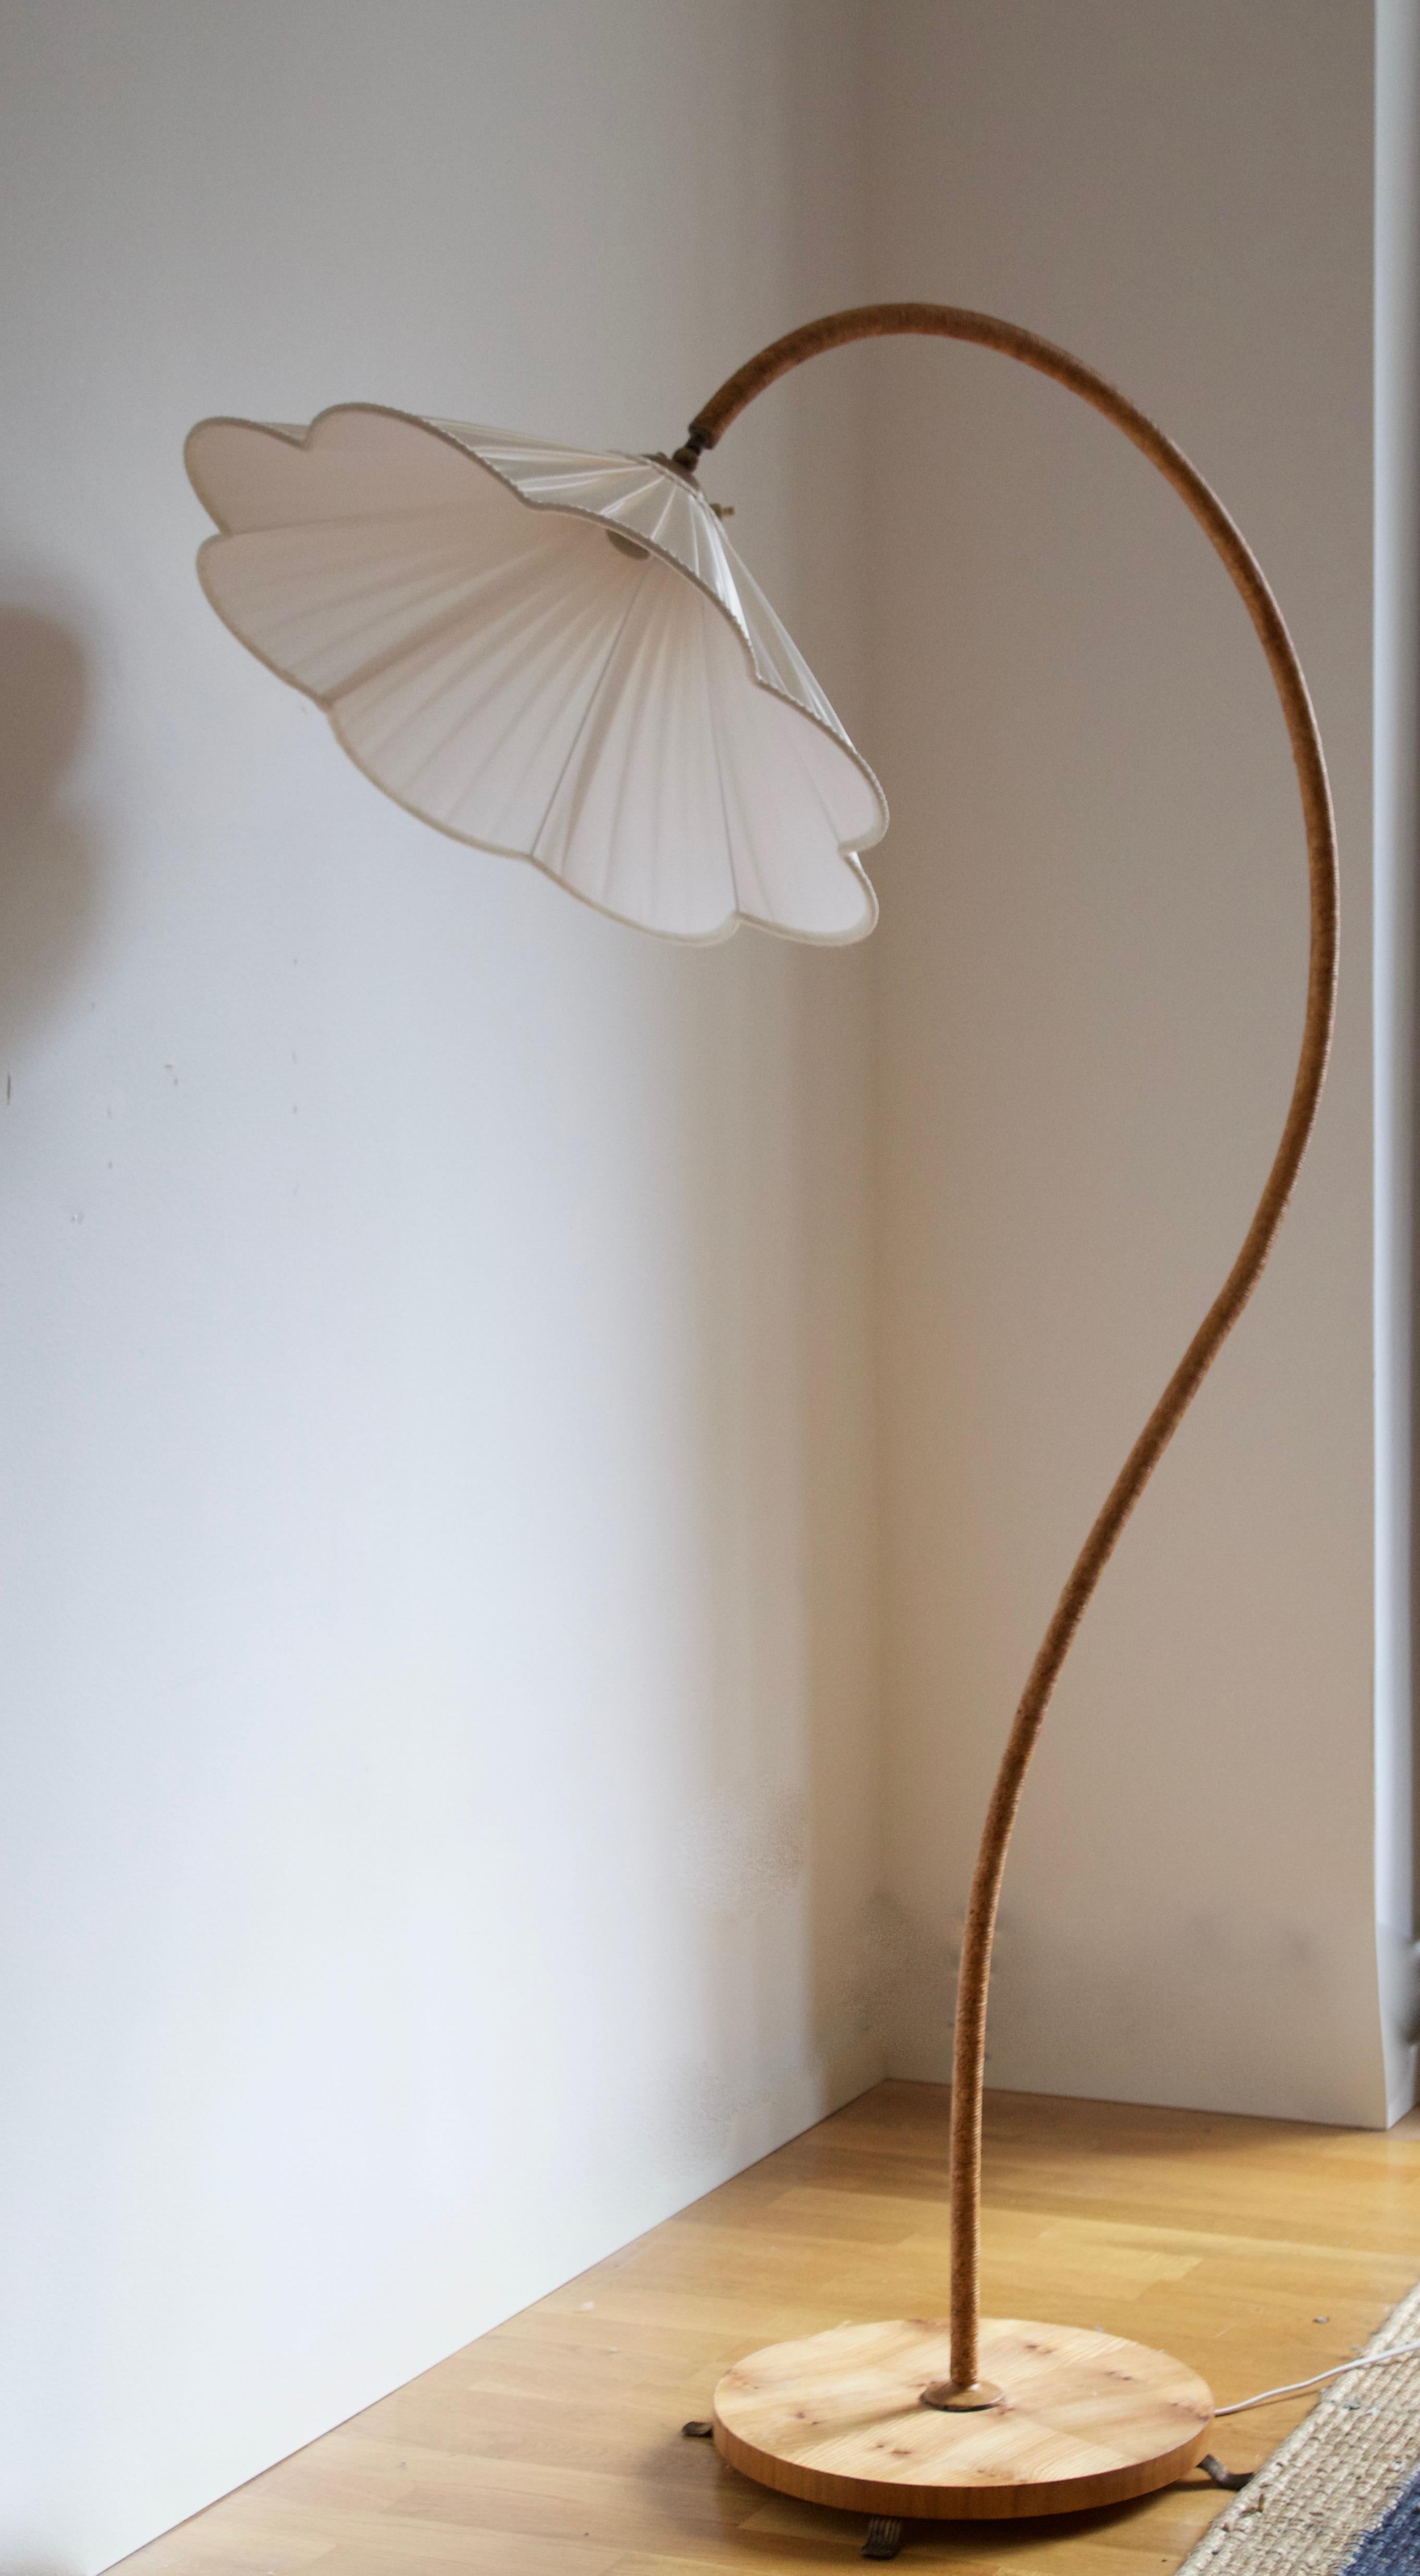 An organic floor lamp. Designed by an unknown Swedish modernist designer, c. 1940s. Produced in brass, pine, cord and brass. Brand new high-end lampshade.

Other designers working in the organic style include Jean Royère, Gio Ponti, Vladimir